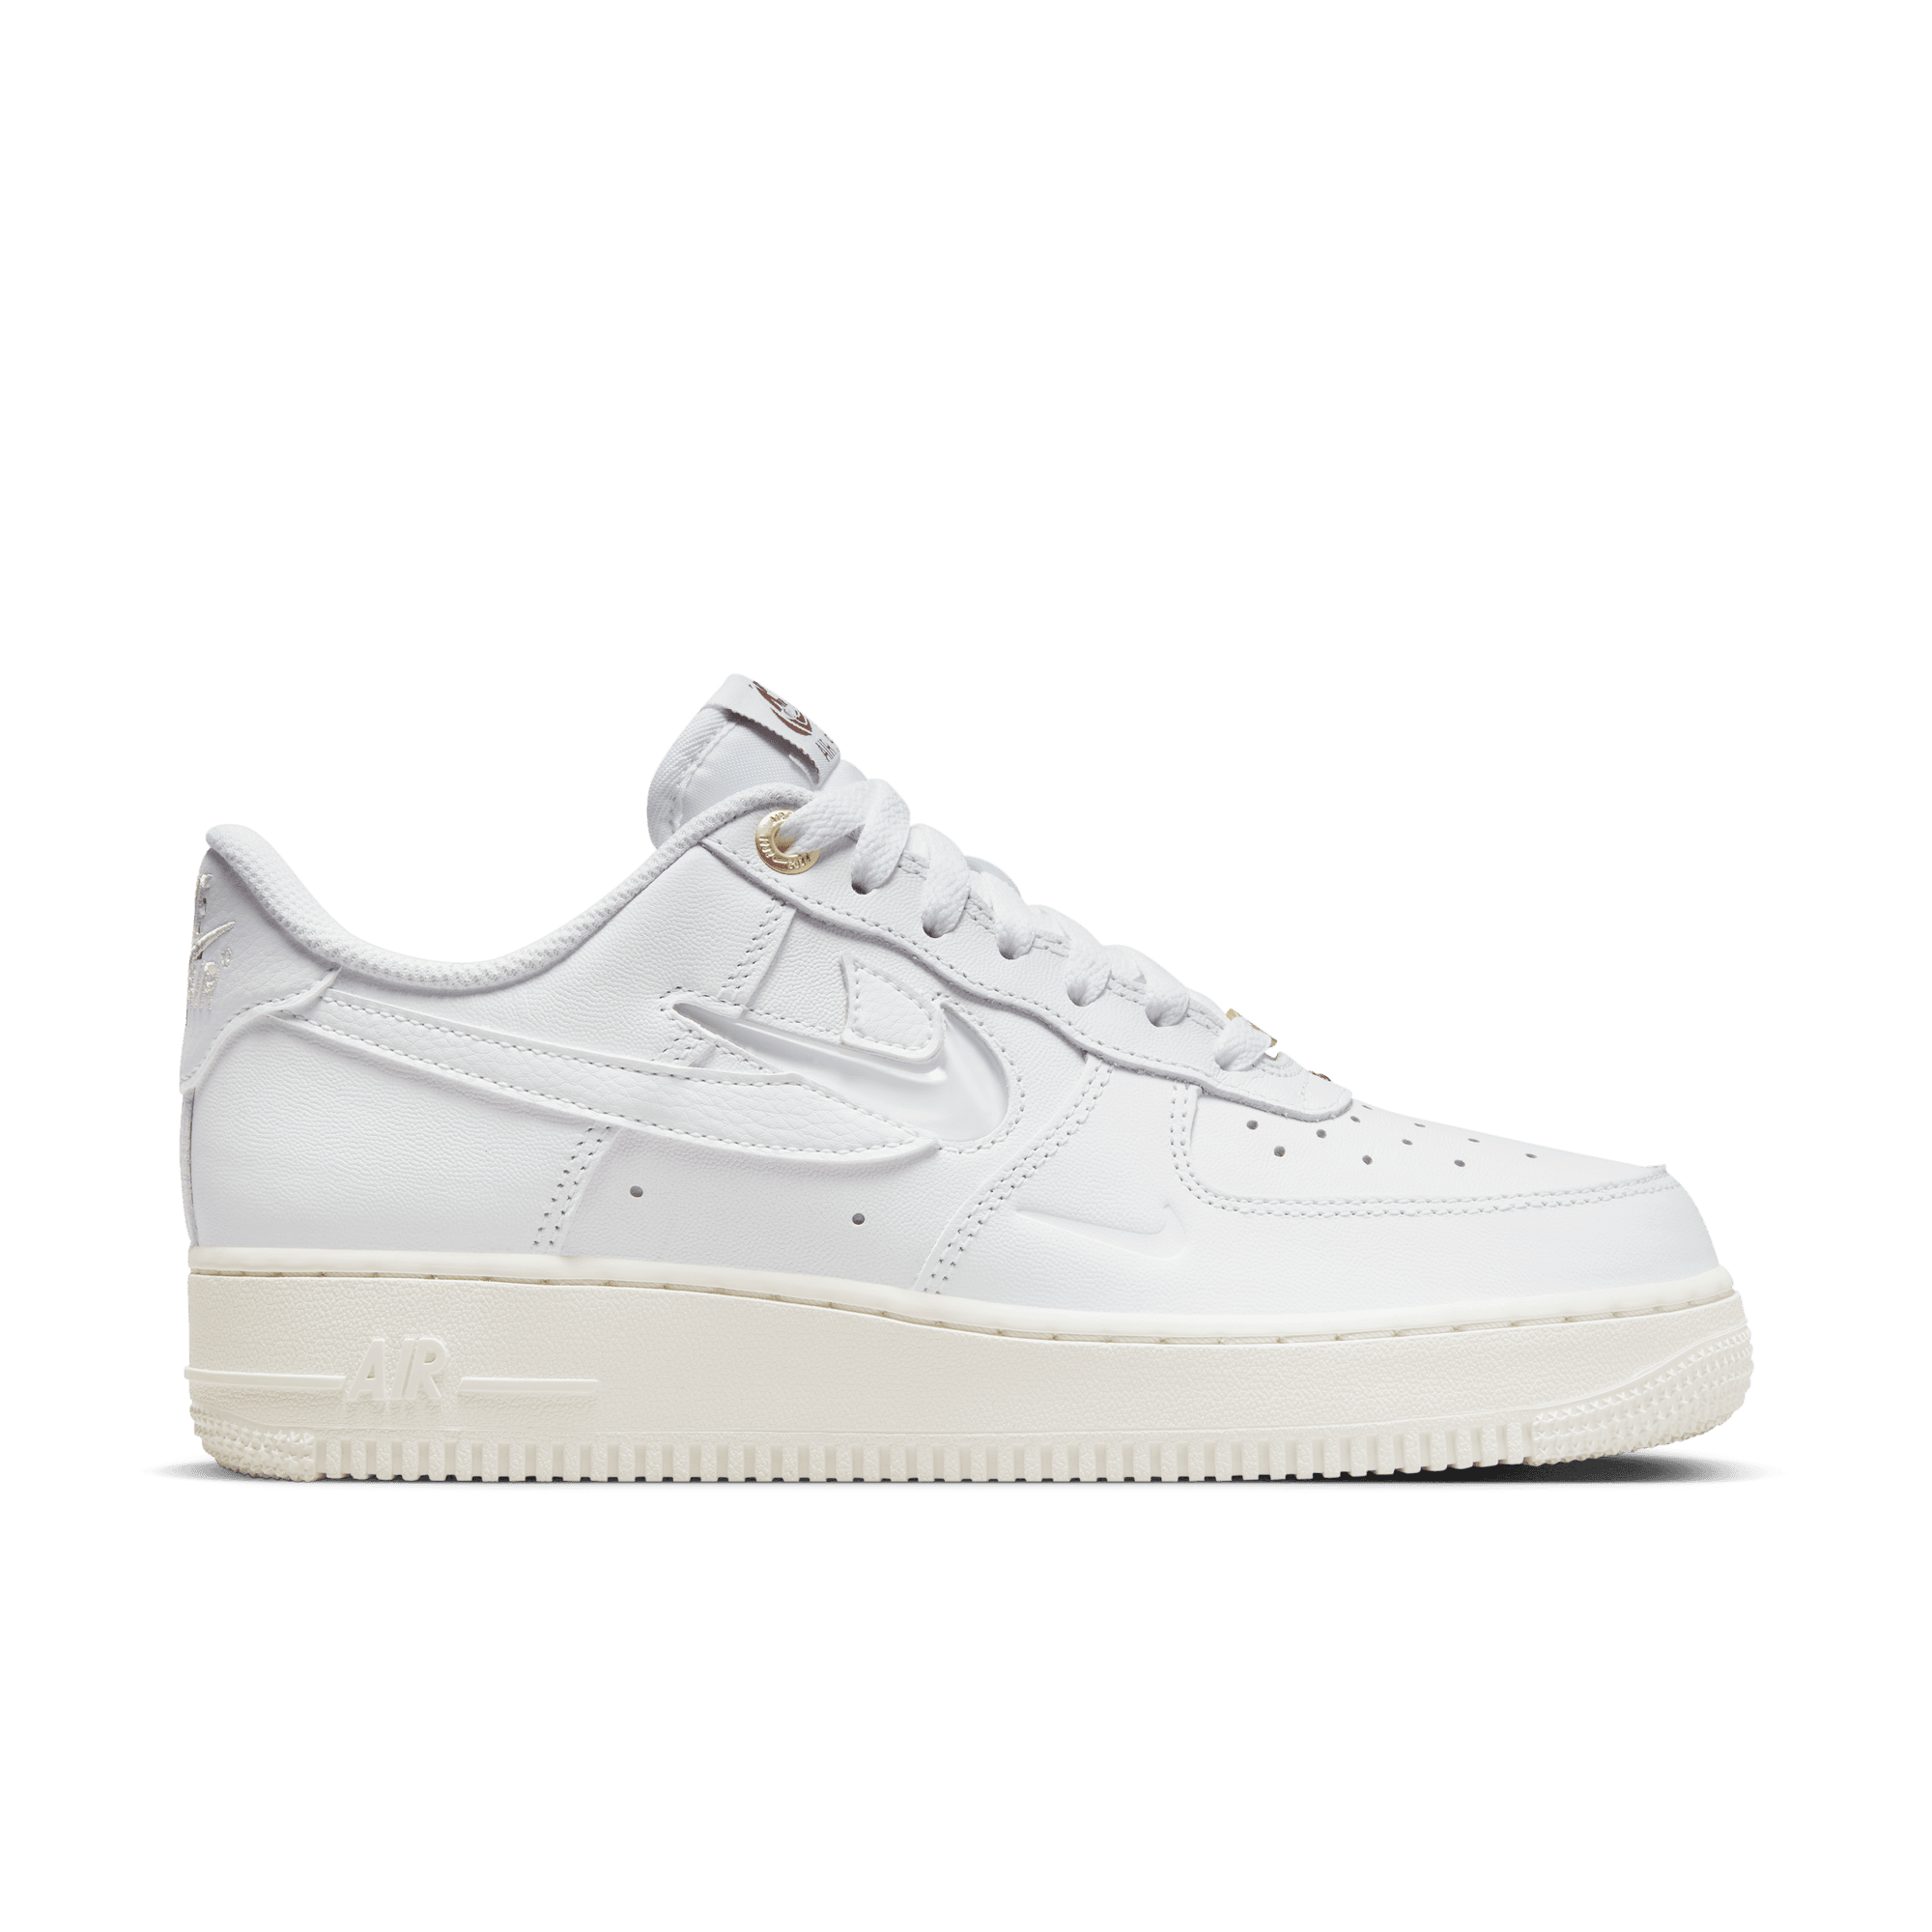 Nike Air Force 1 Low '07 LV8 Join Forces Sail